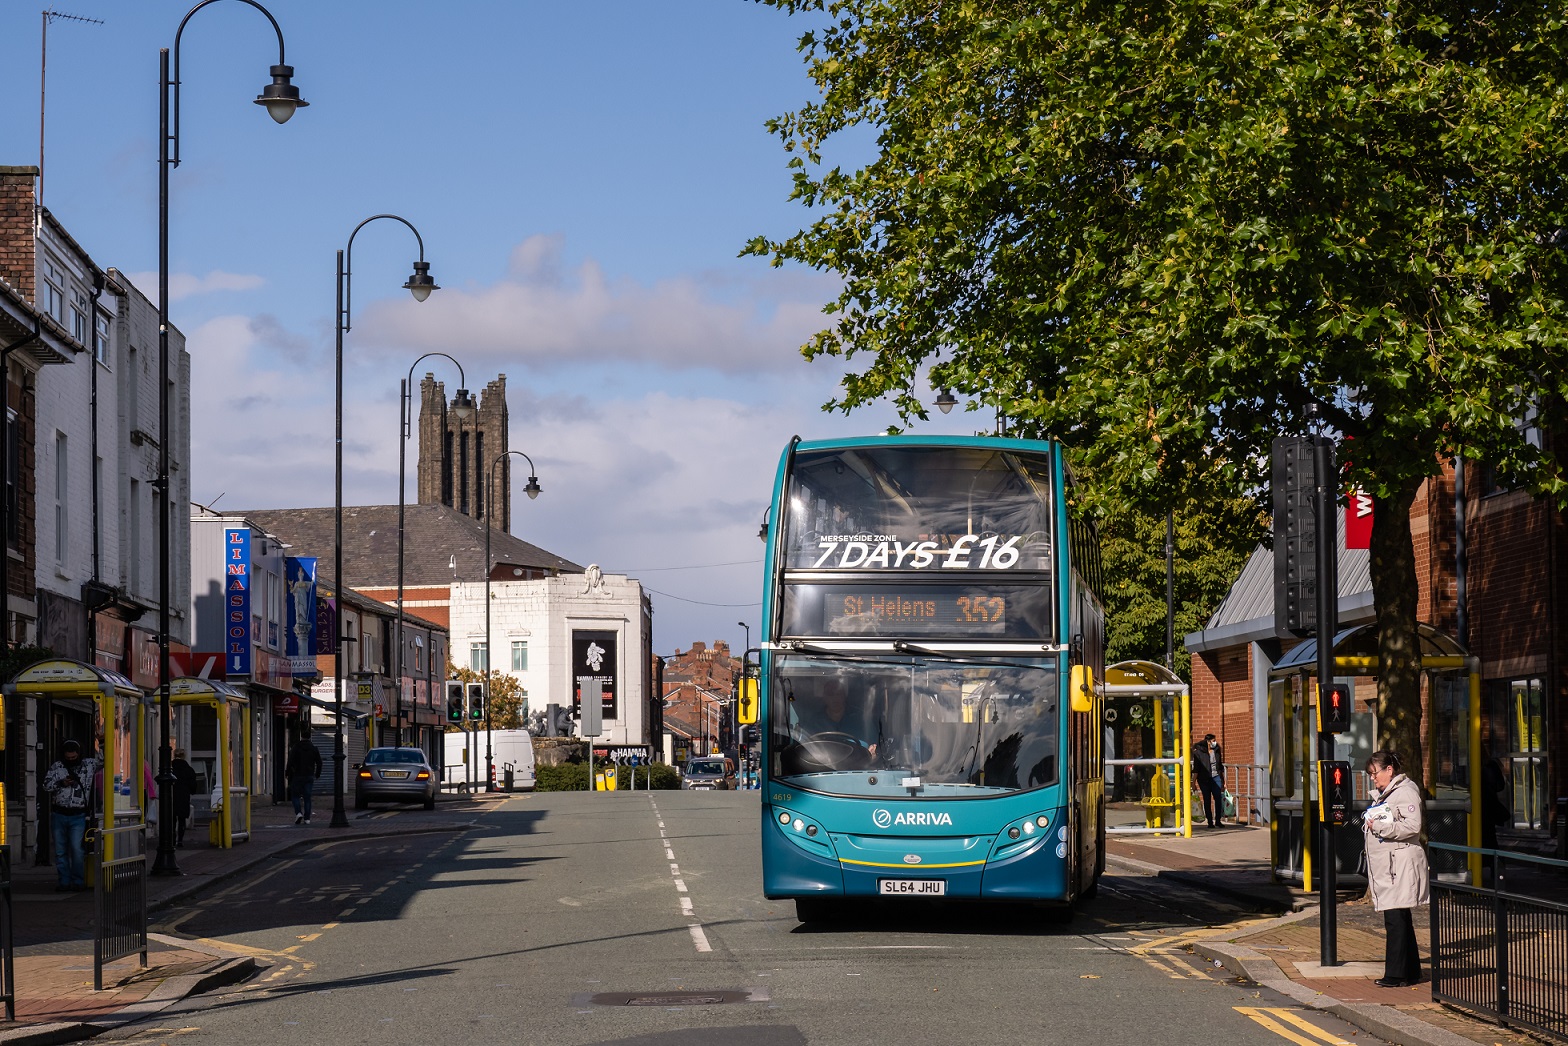 Many areas envious of bus franchising powers says Steve Rotheram